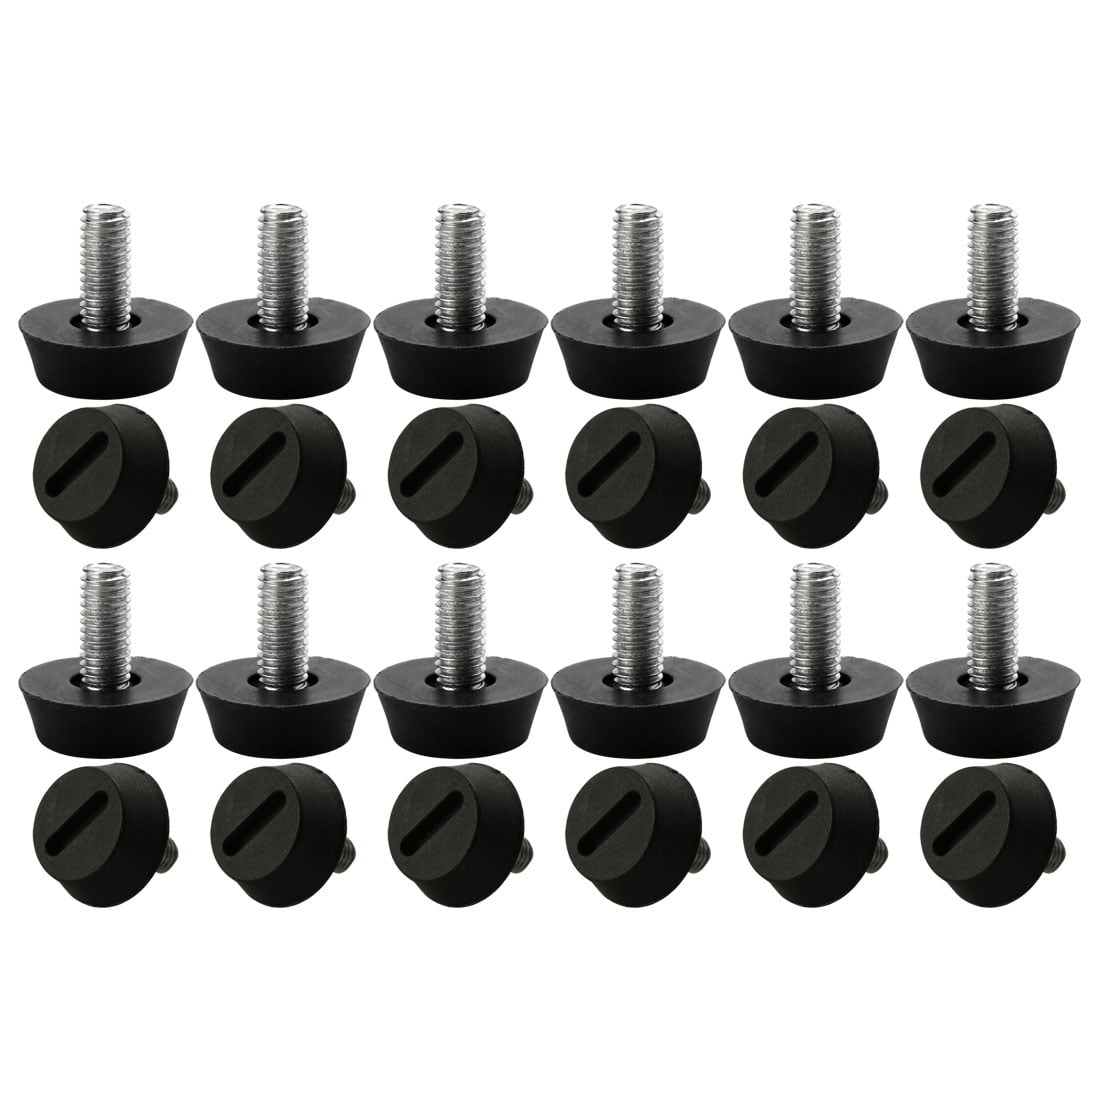 Details about   M6 x 13 x 30mm Leveling Feet Adjustable Leveler for Furniture Table Leg 16pcs 